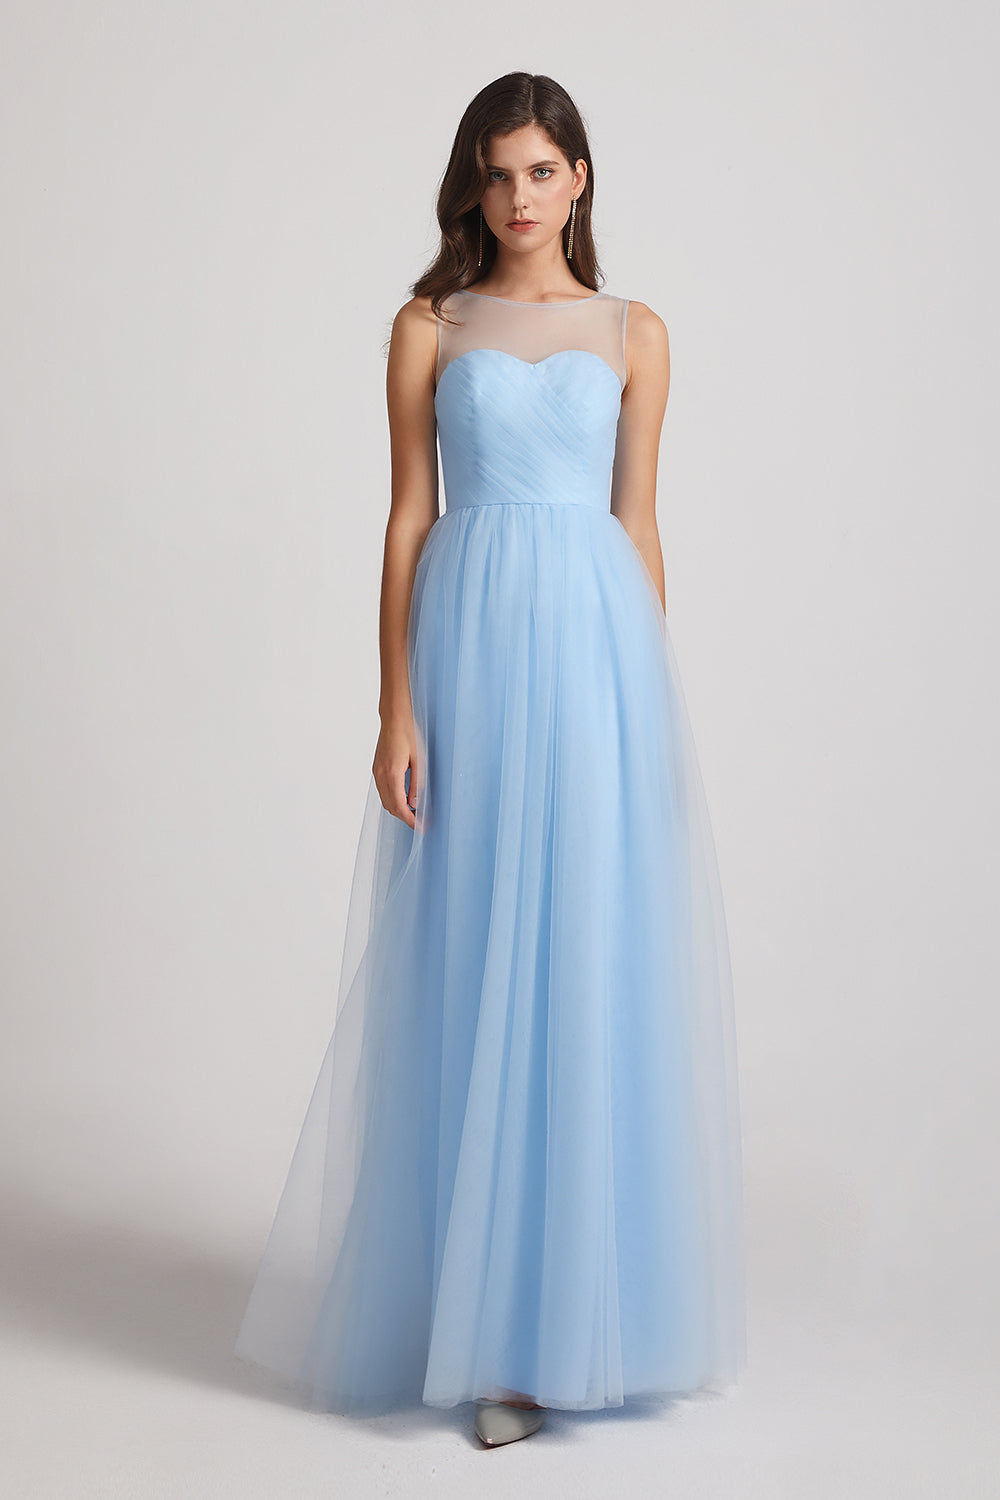 Tulle Bridesmaid Dresses in baby blue